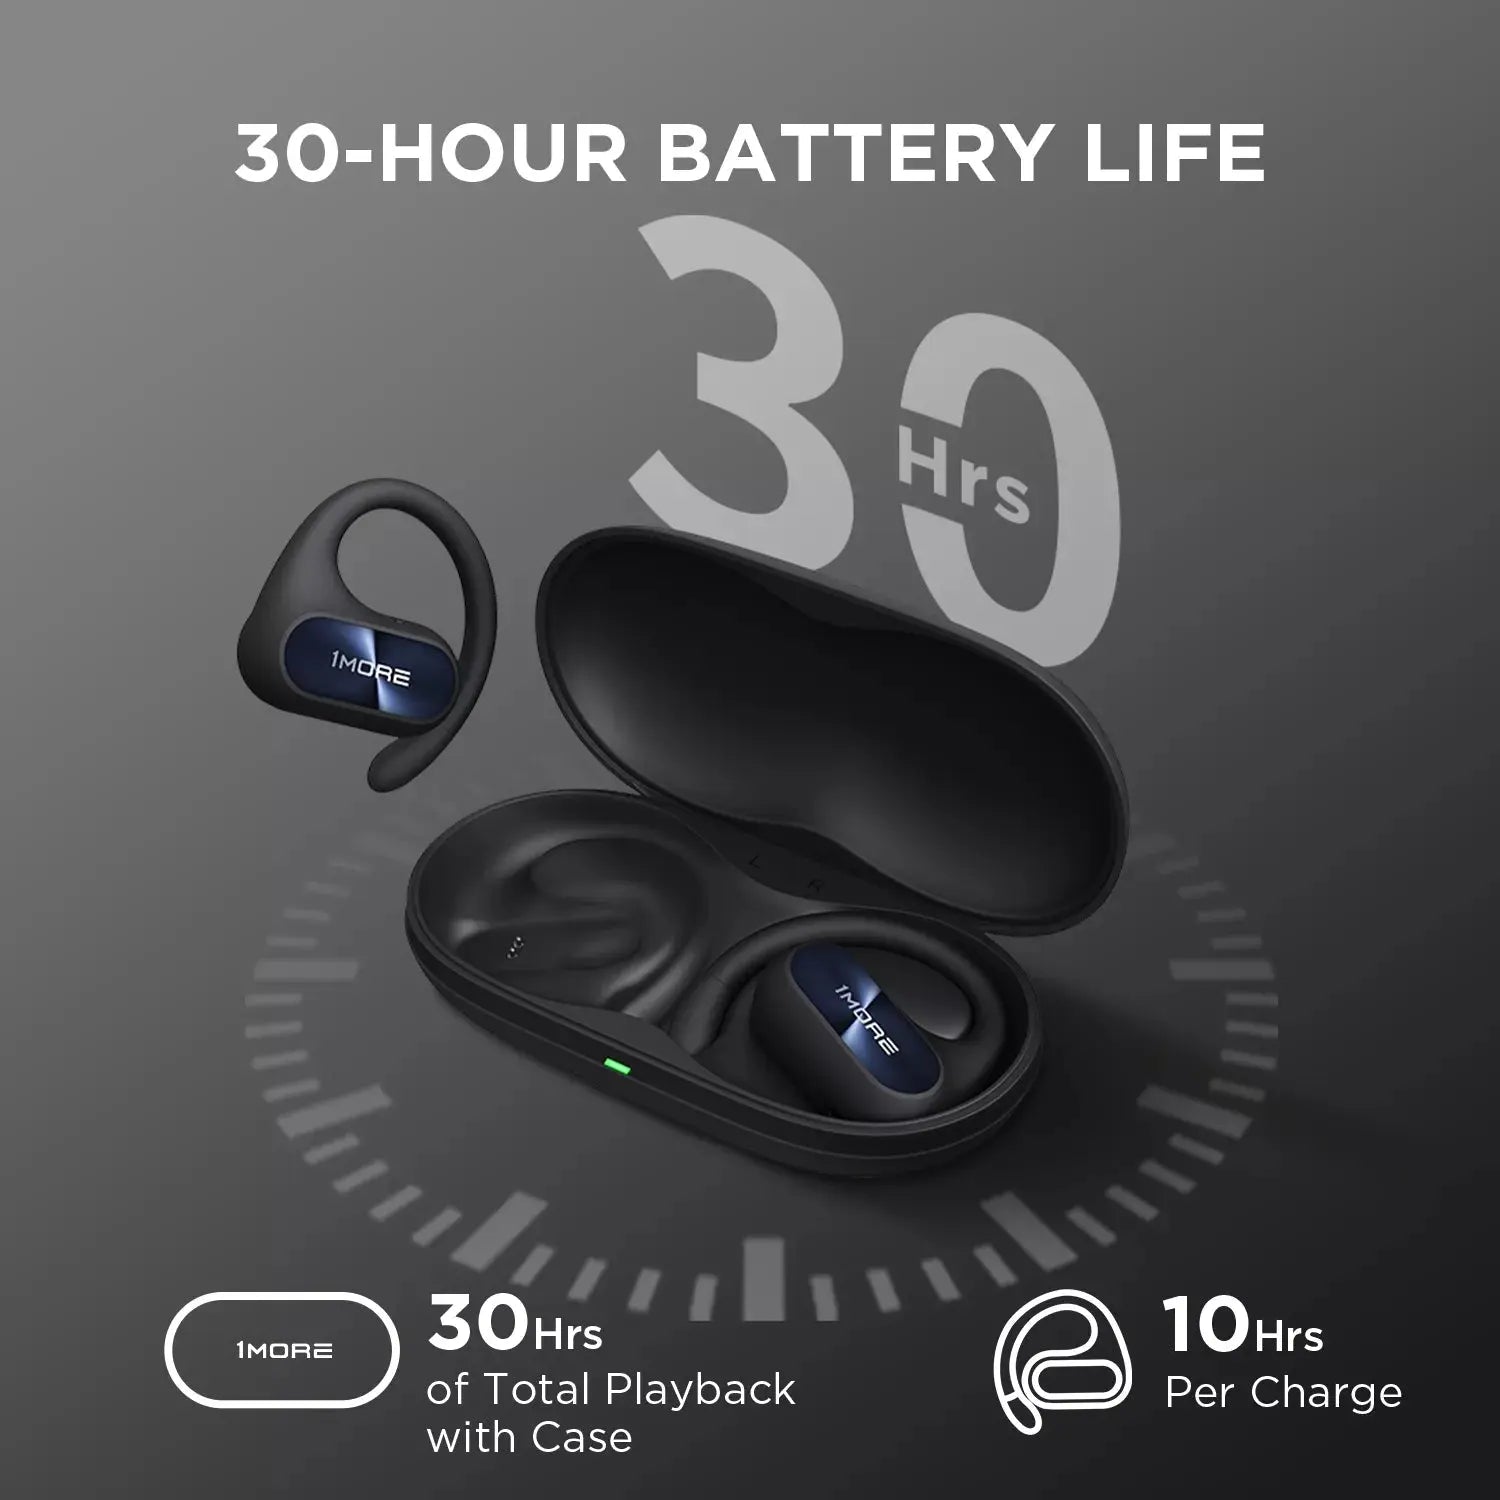 1MORE Fit SE Open Earbuds S30